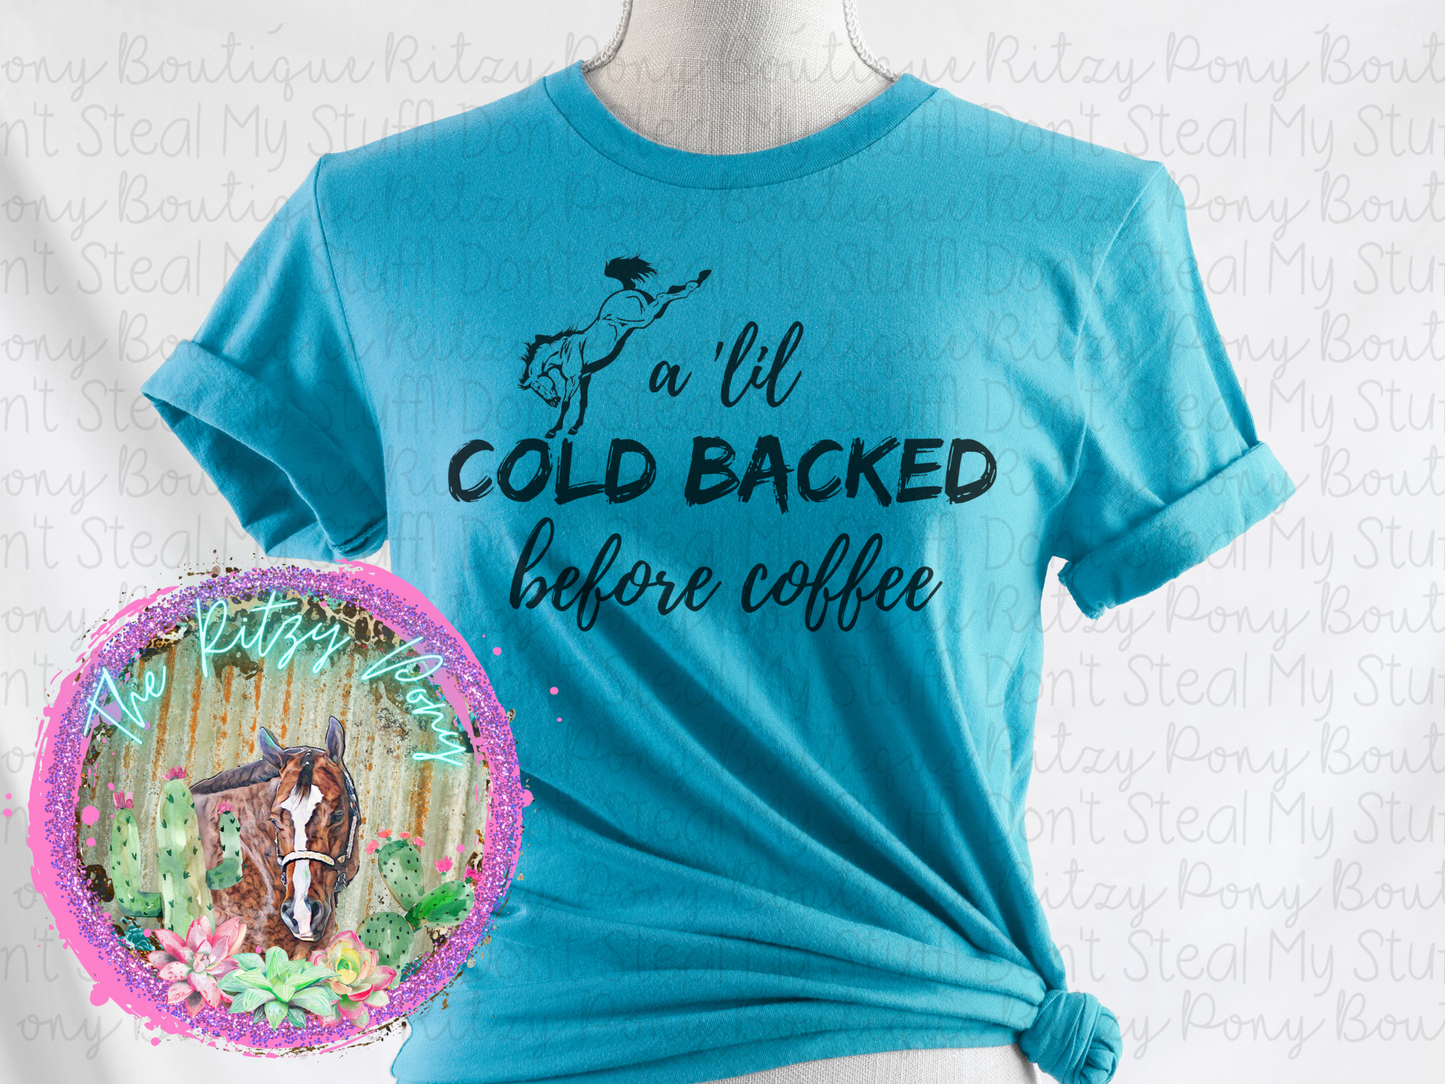 A 'Lil Cold Backed Before Coffee Shirt